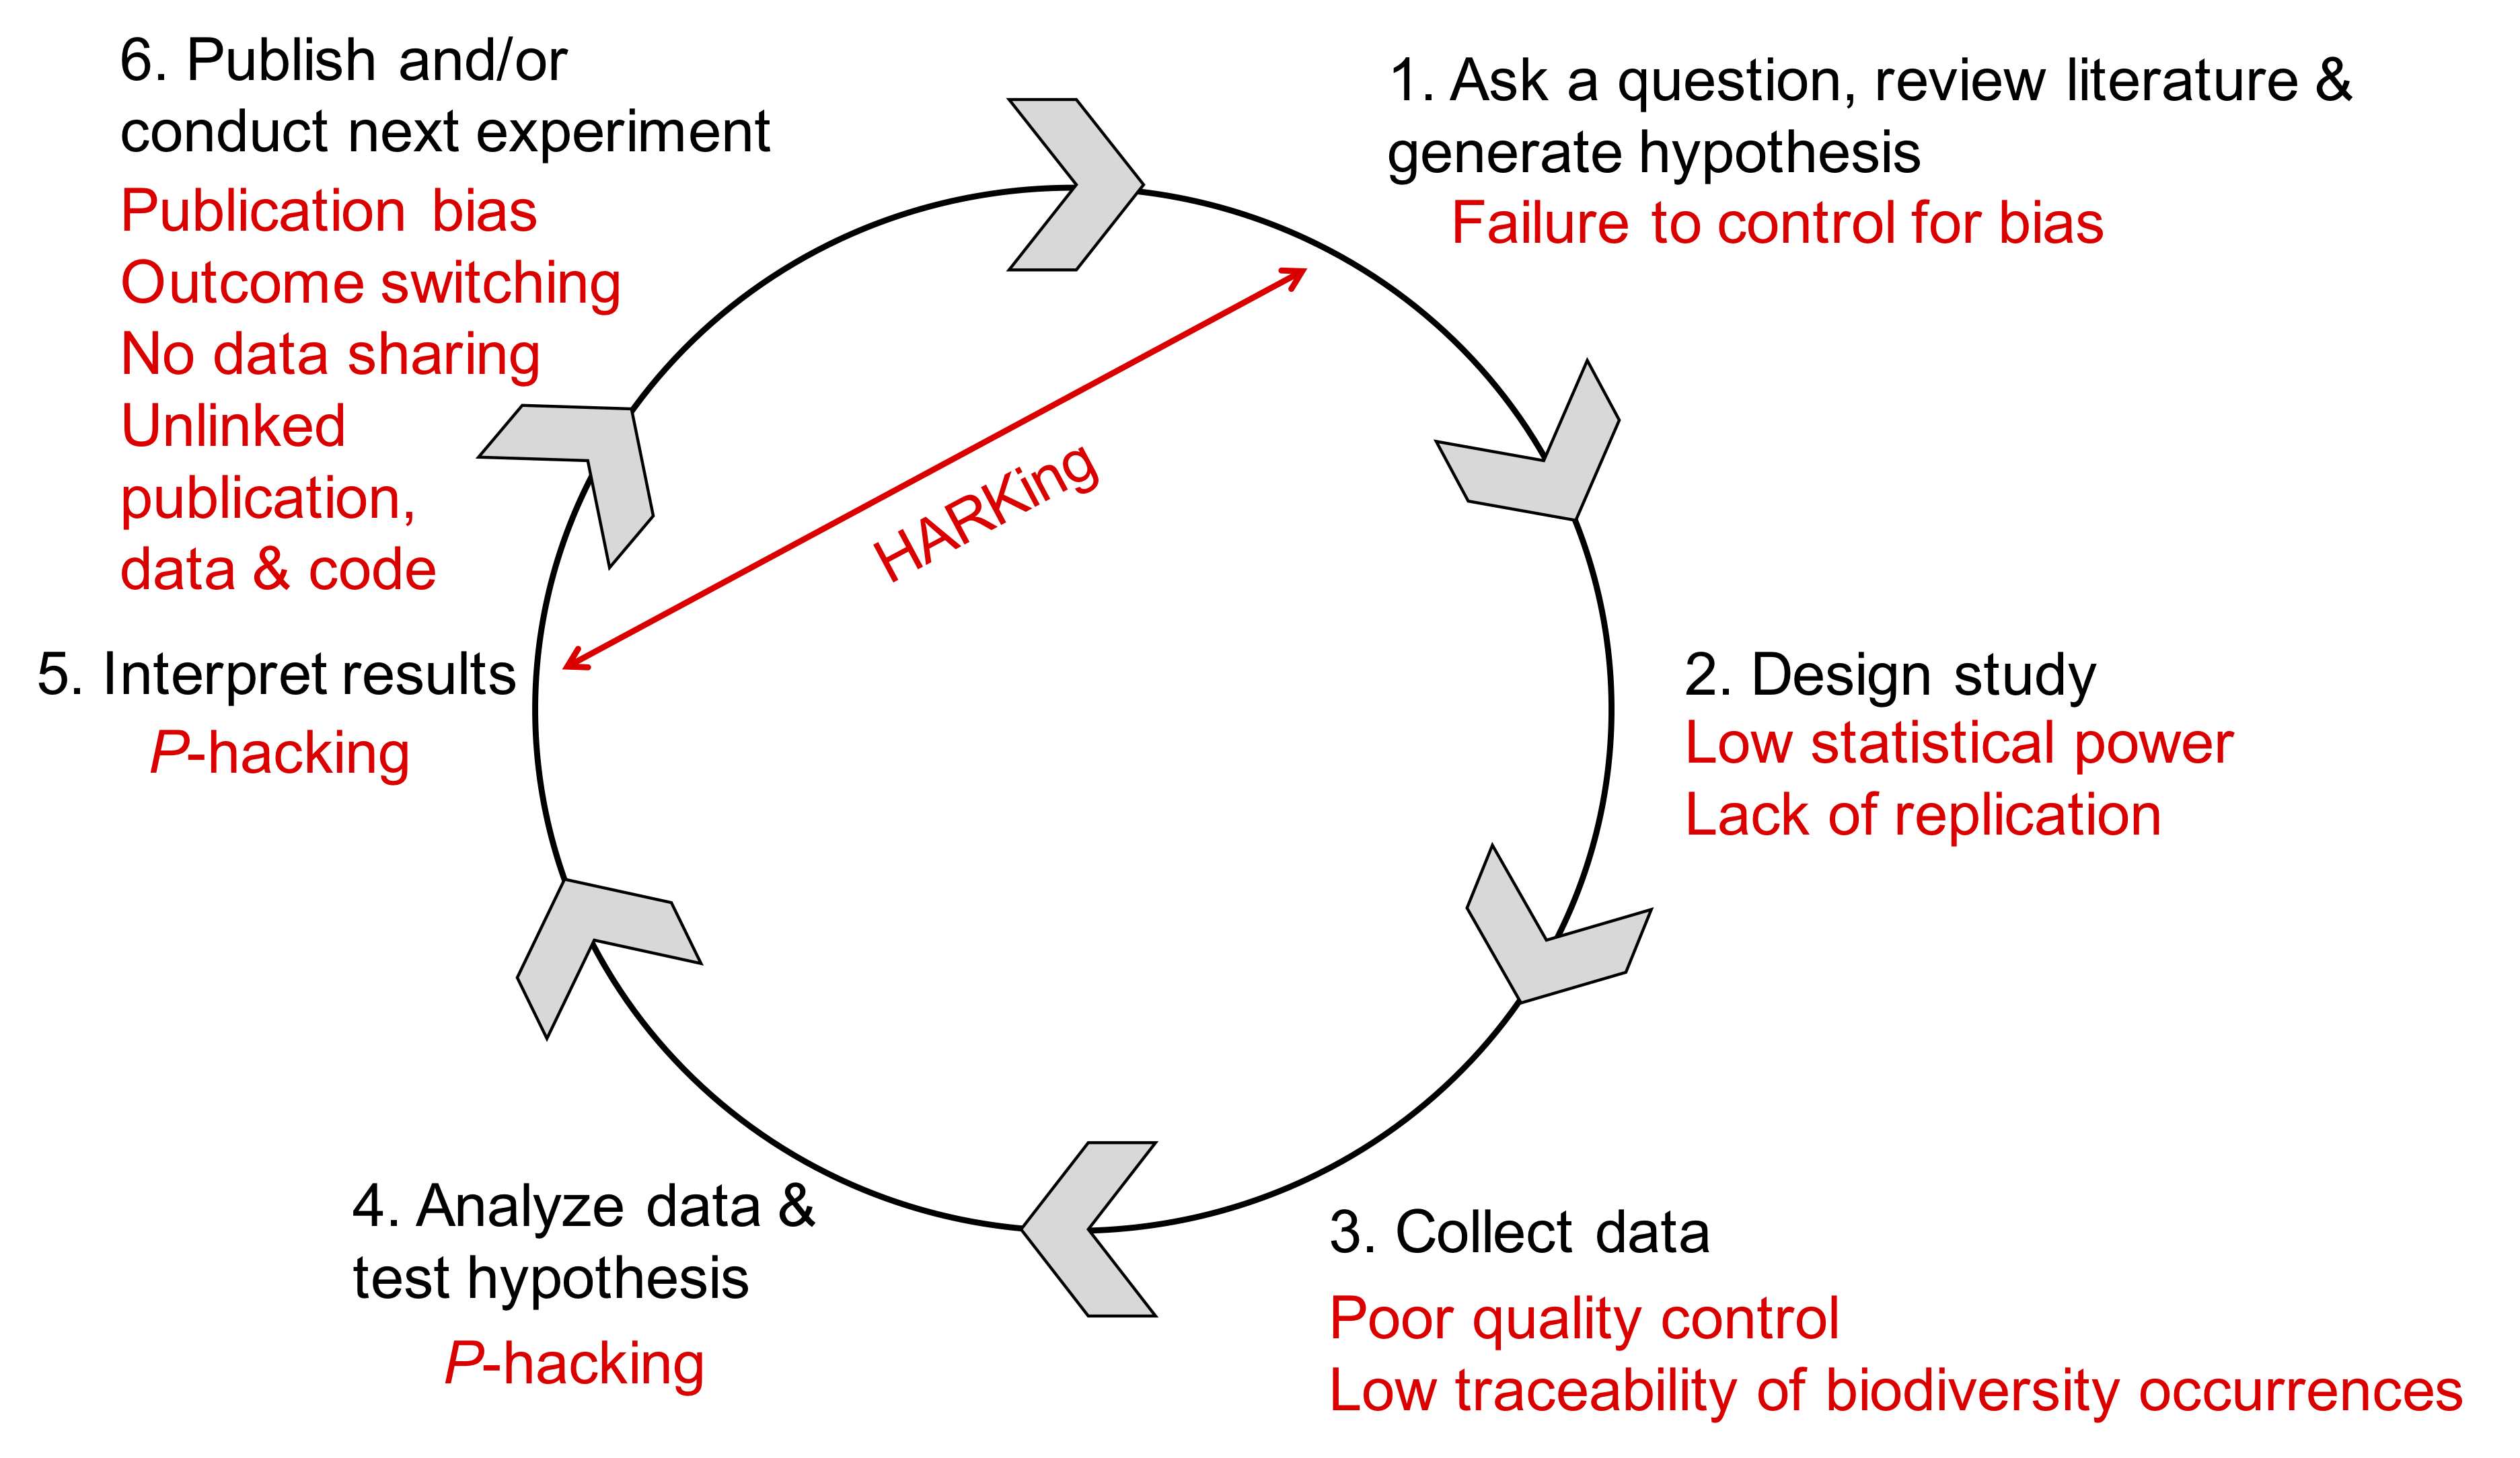 Overview of the scientific process and threats preventing reproducibility of the study (indicated in red). Abbreviations: HARKing: hypothesizing after the results are known; P-hacking: data dredging.